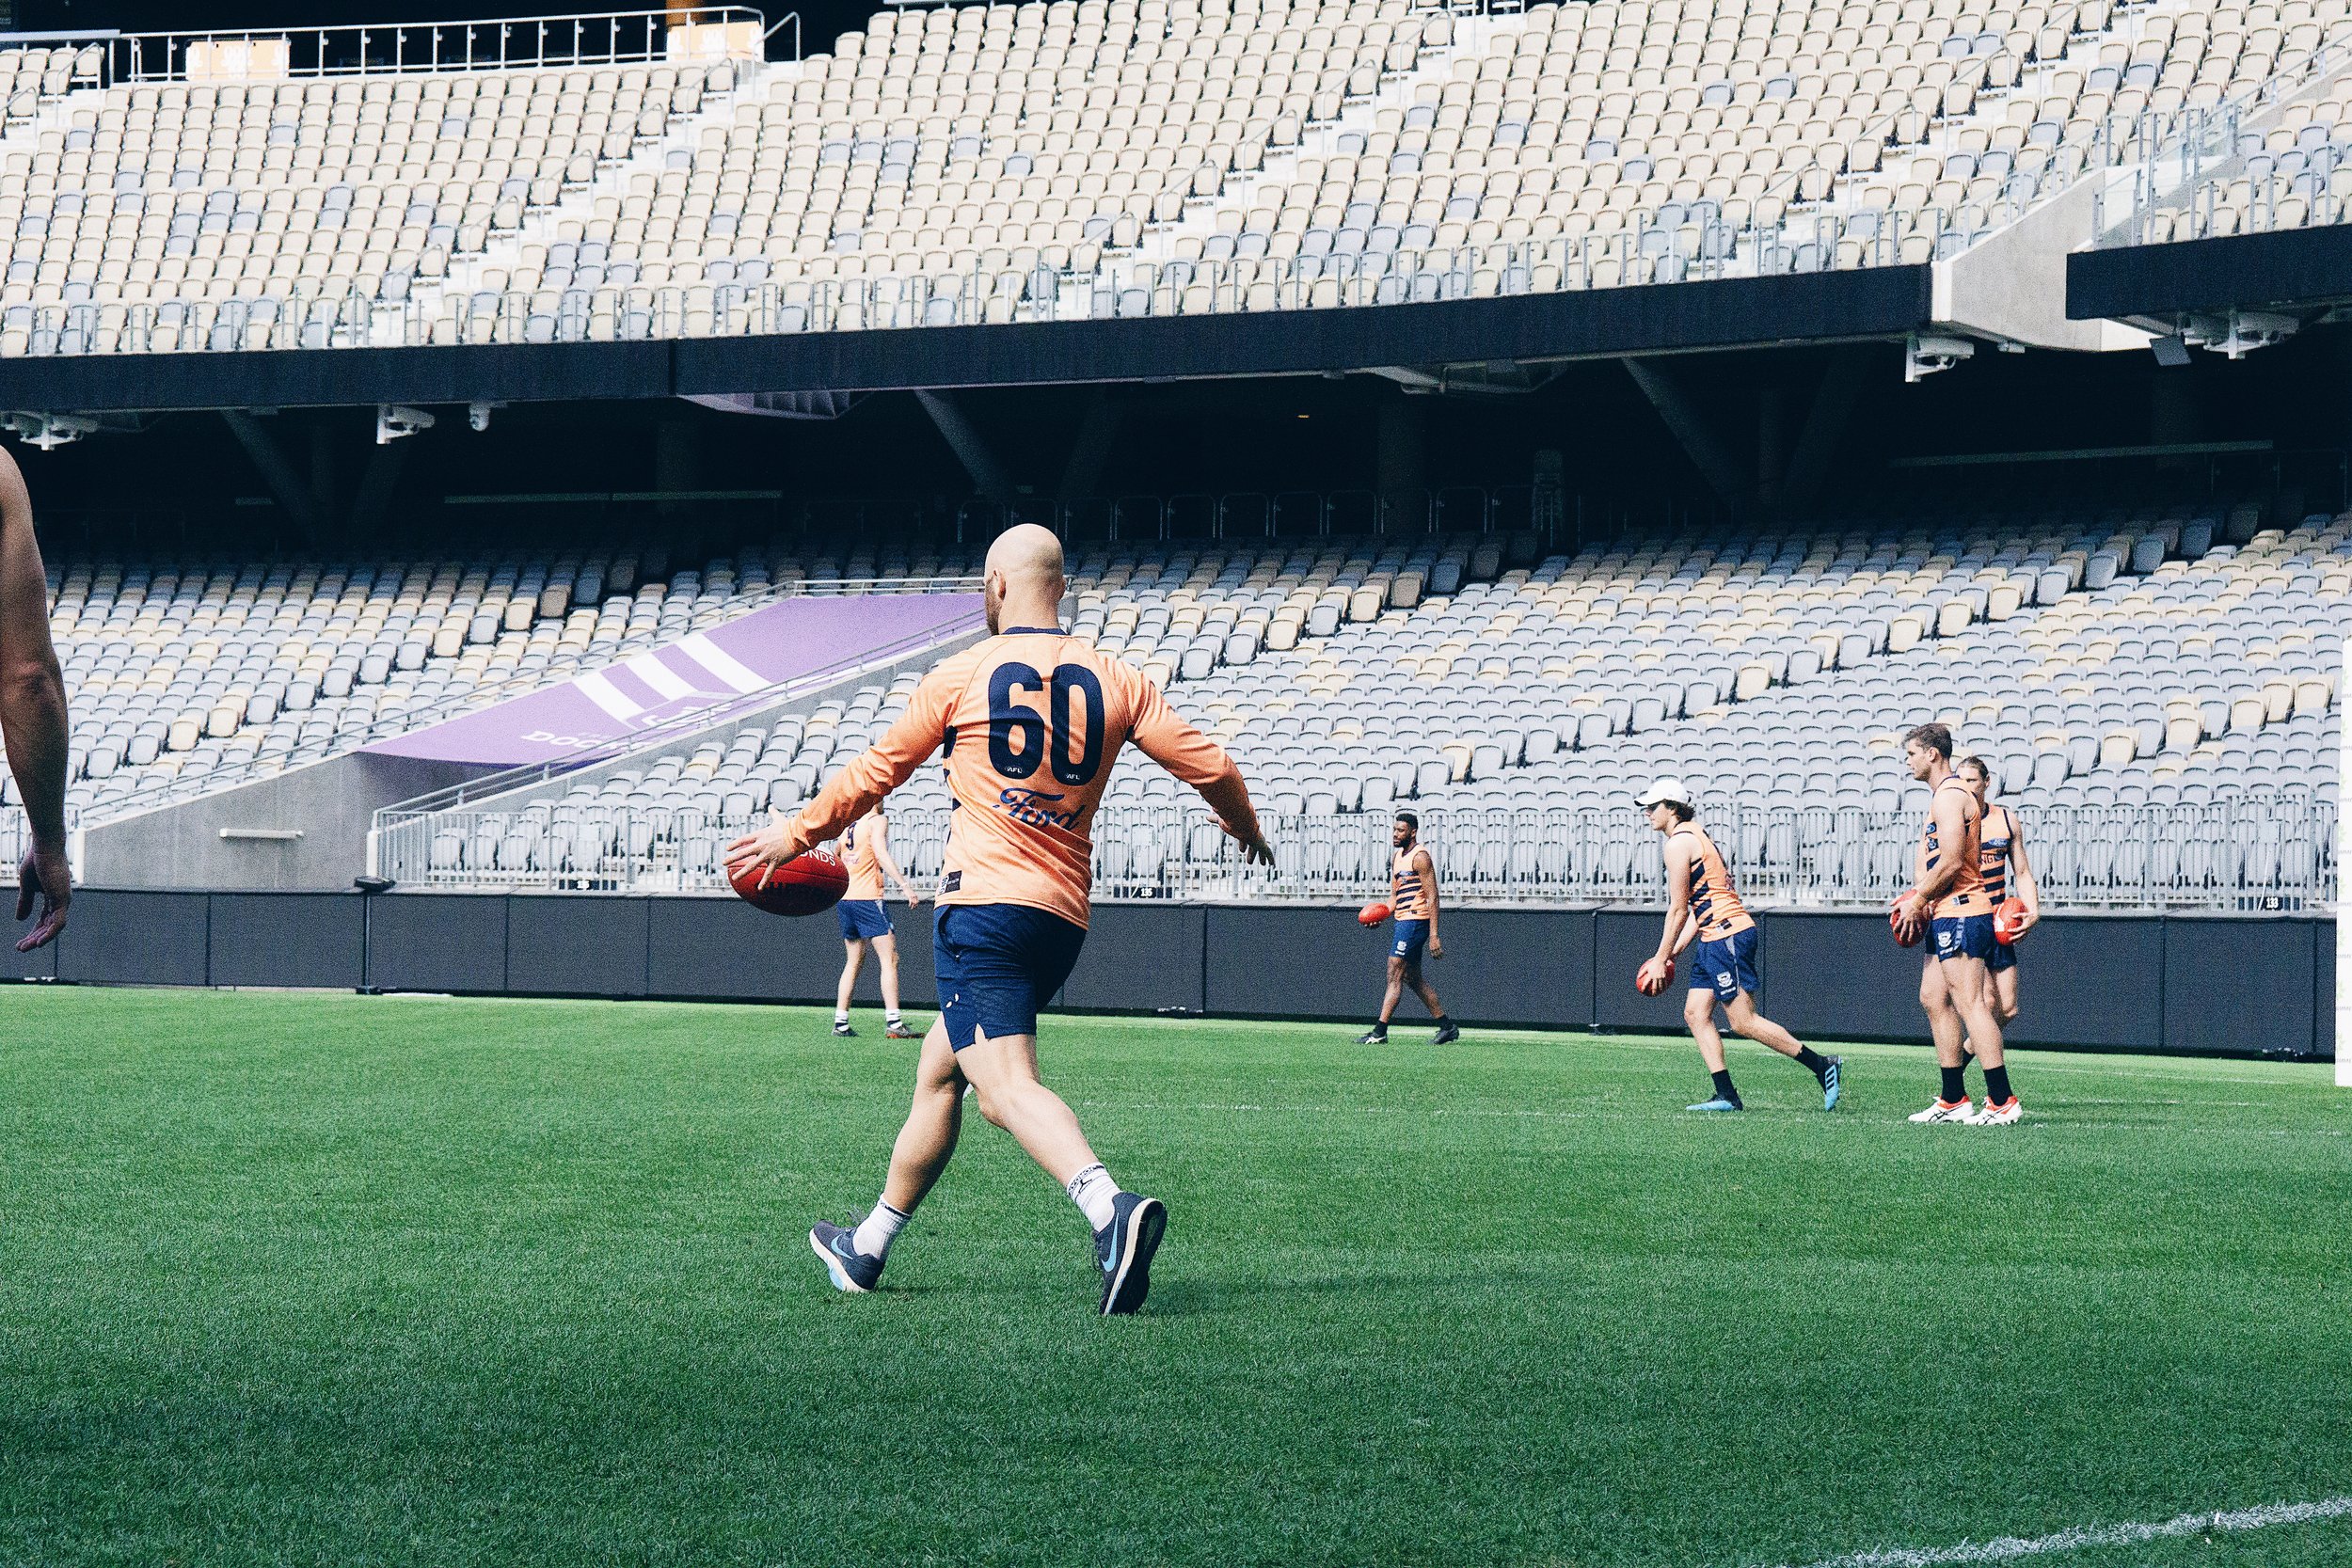  Gary Ablett in the No. 60 practices from the pocket. 